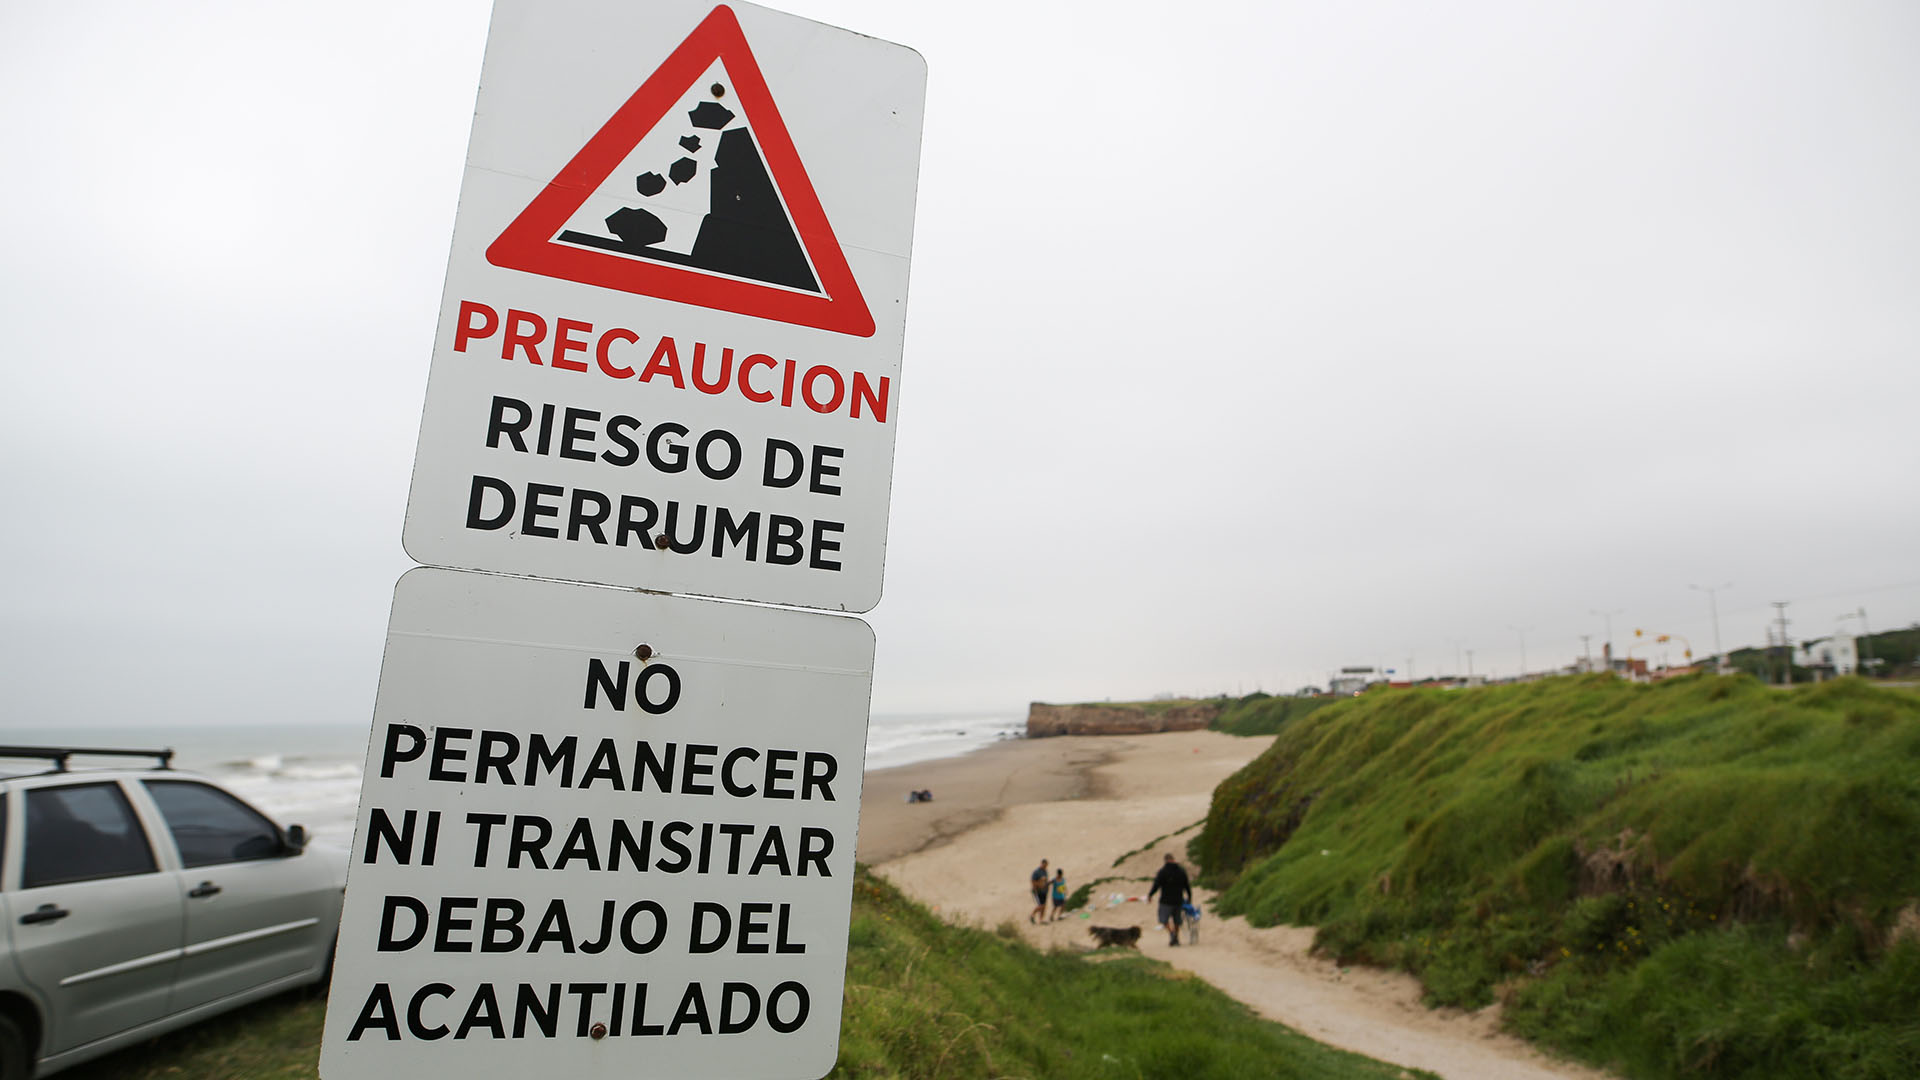 On Las Delicias beaches there is an abundant amount of signage to warn about the dangers of the cliffs